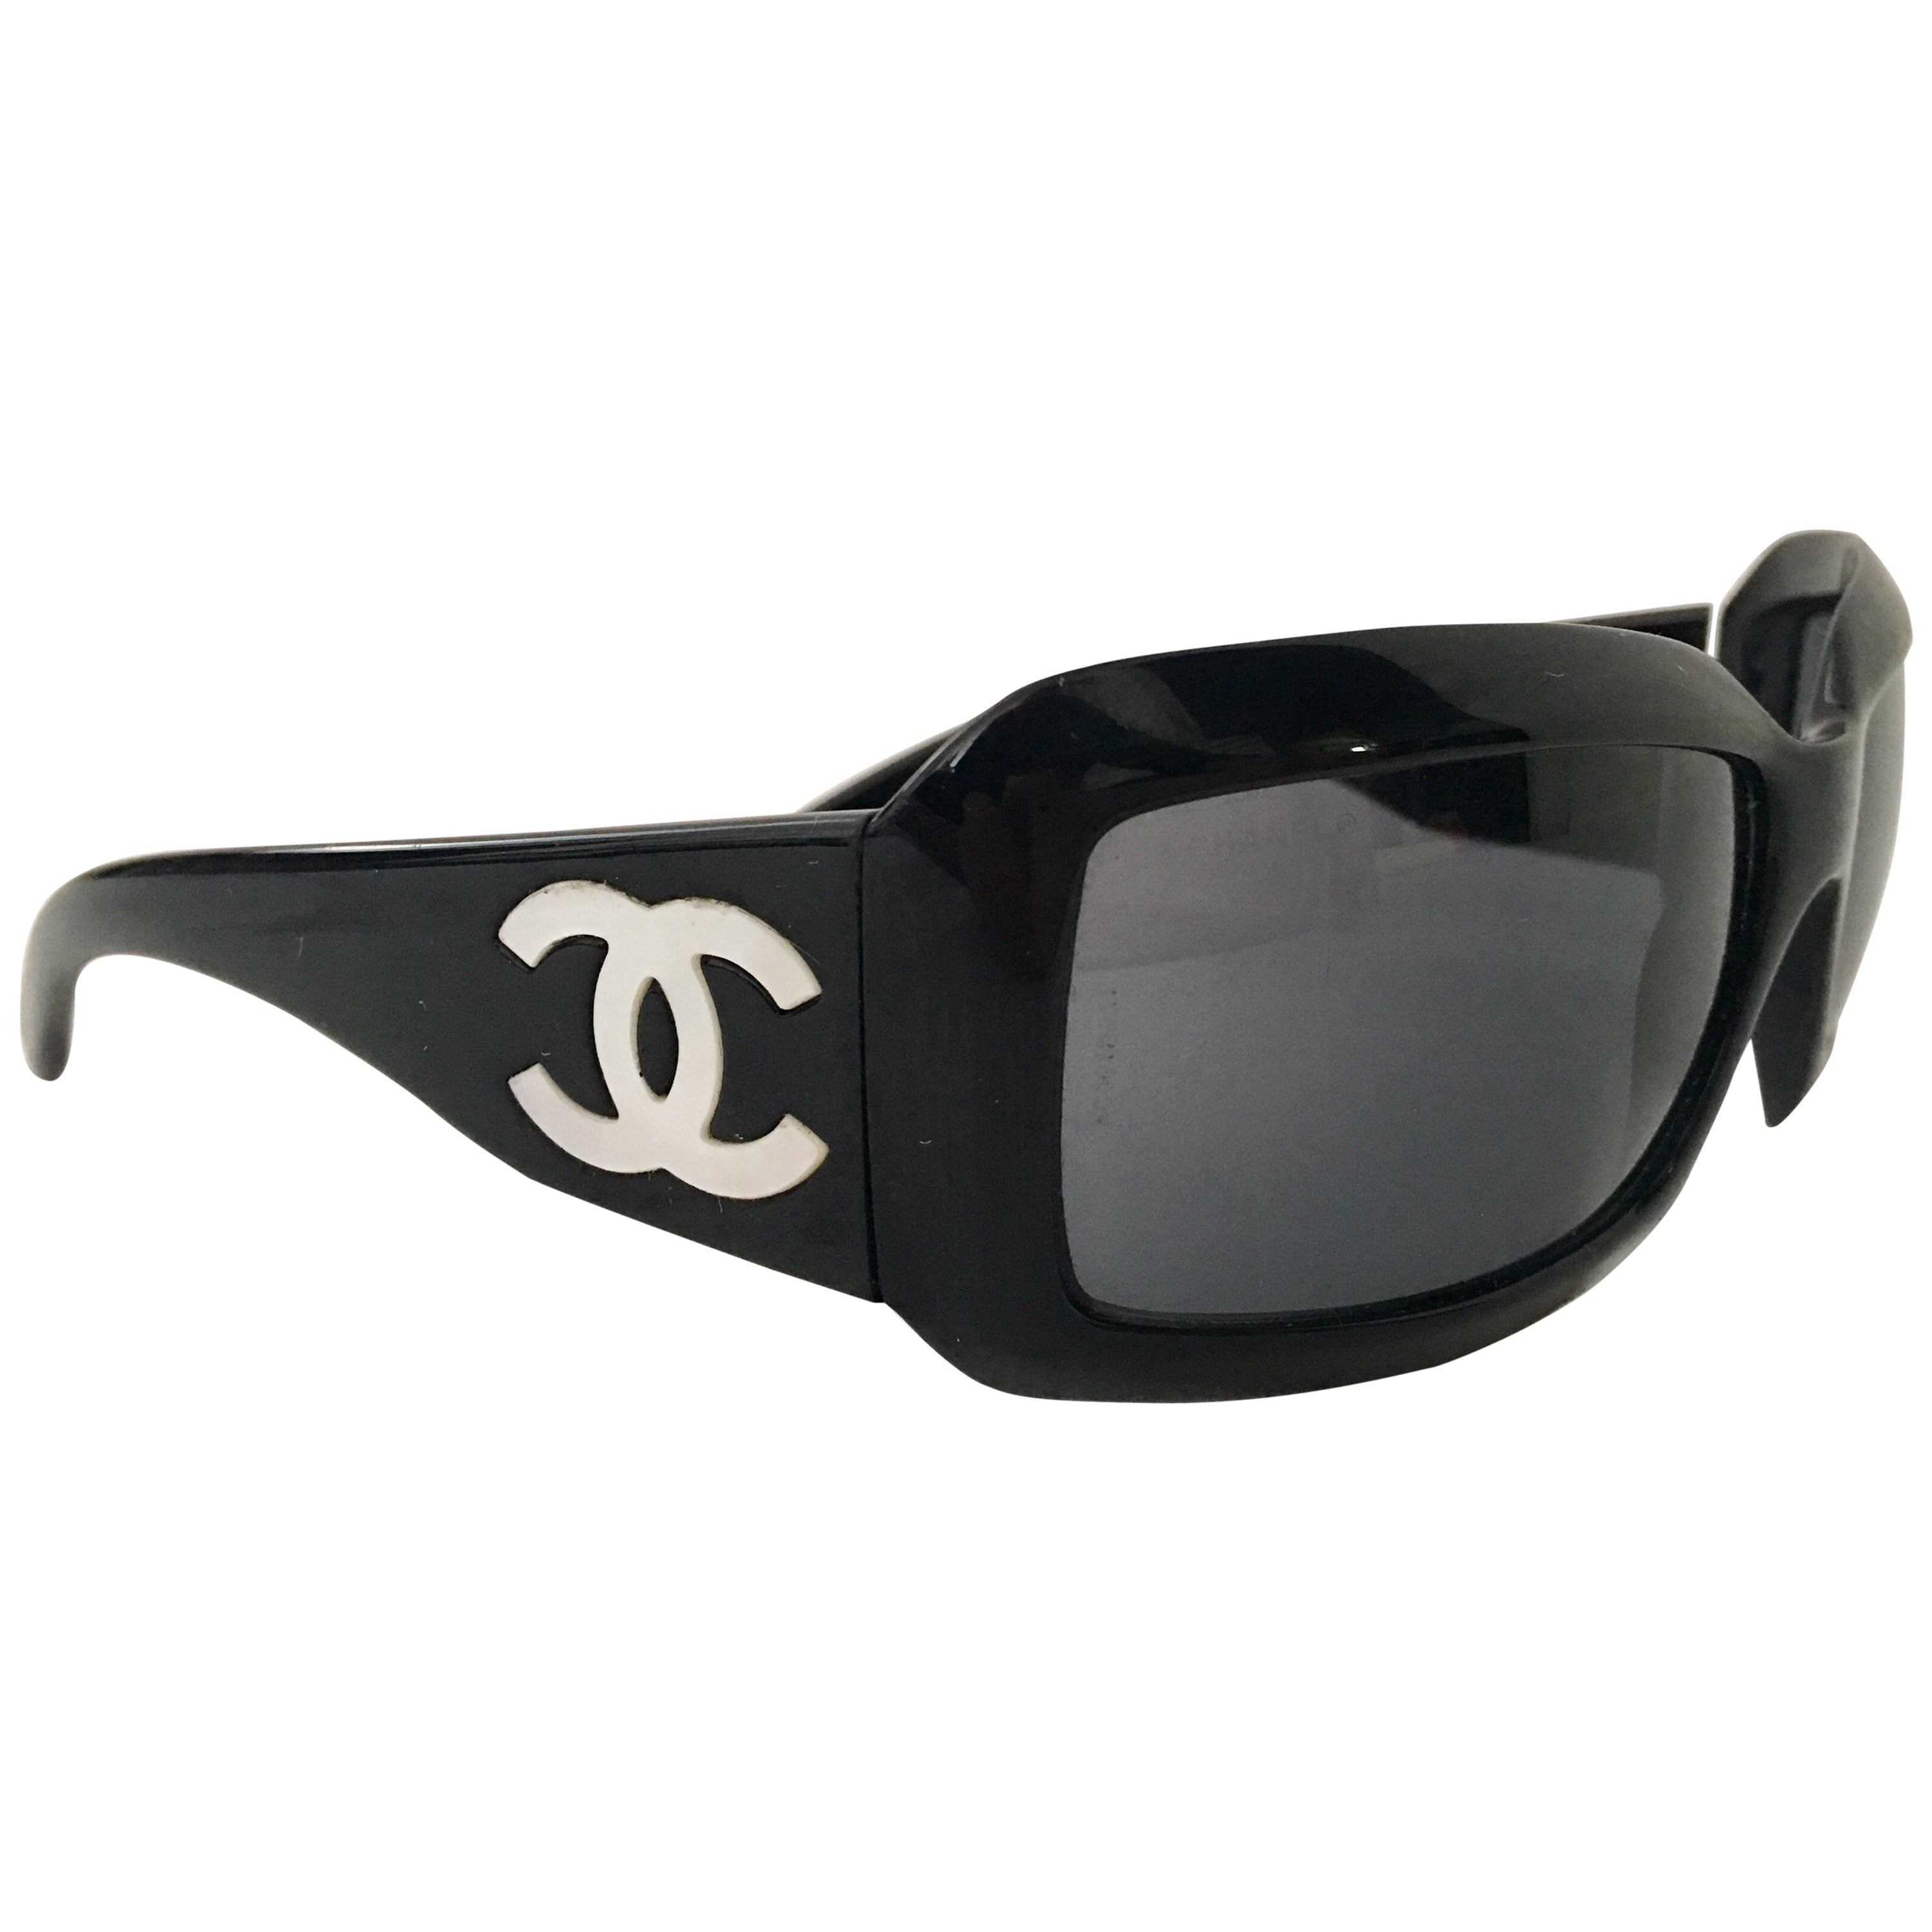 Pre-Owned Chanel Mother of Pearl Square Sunglasses ($225) ❤ liked